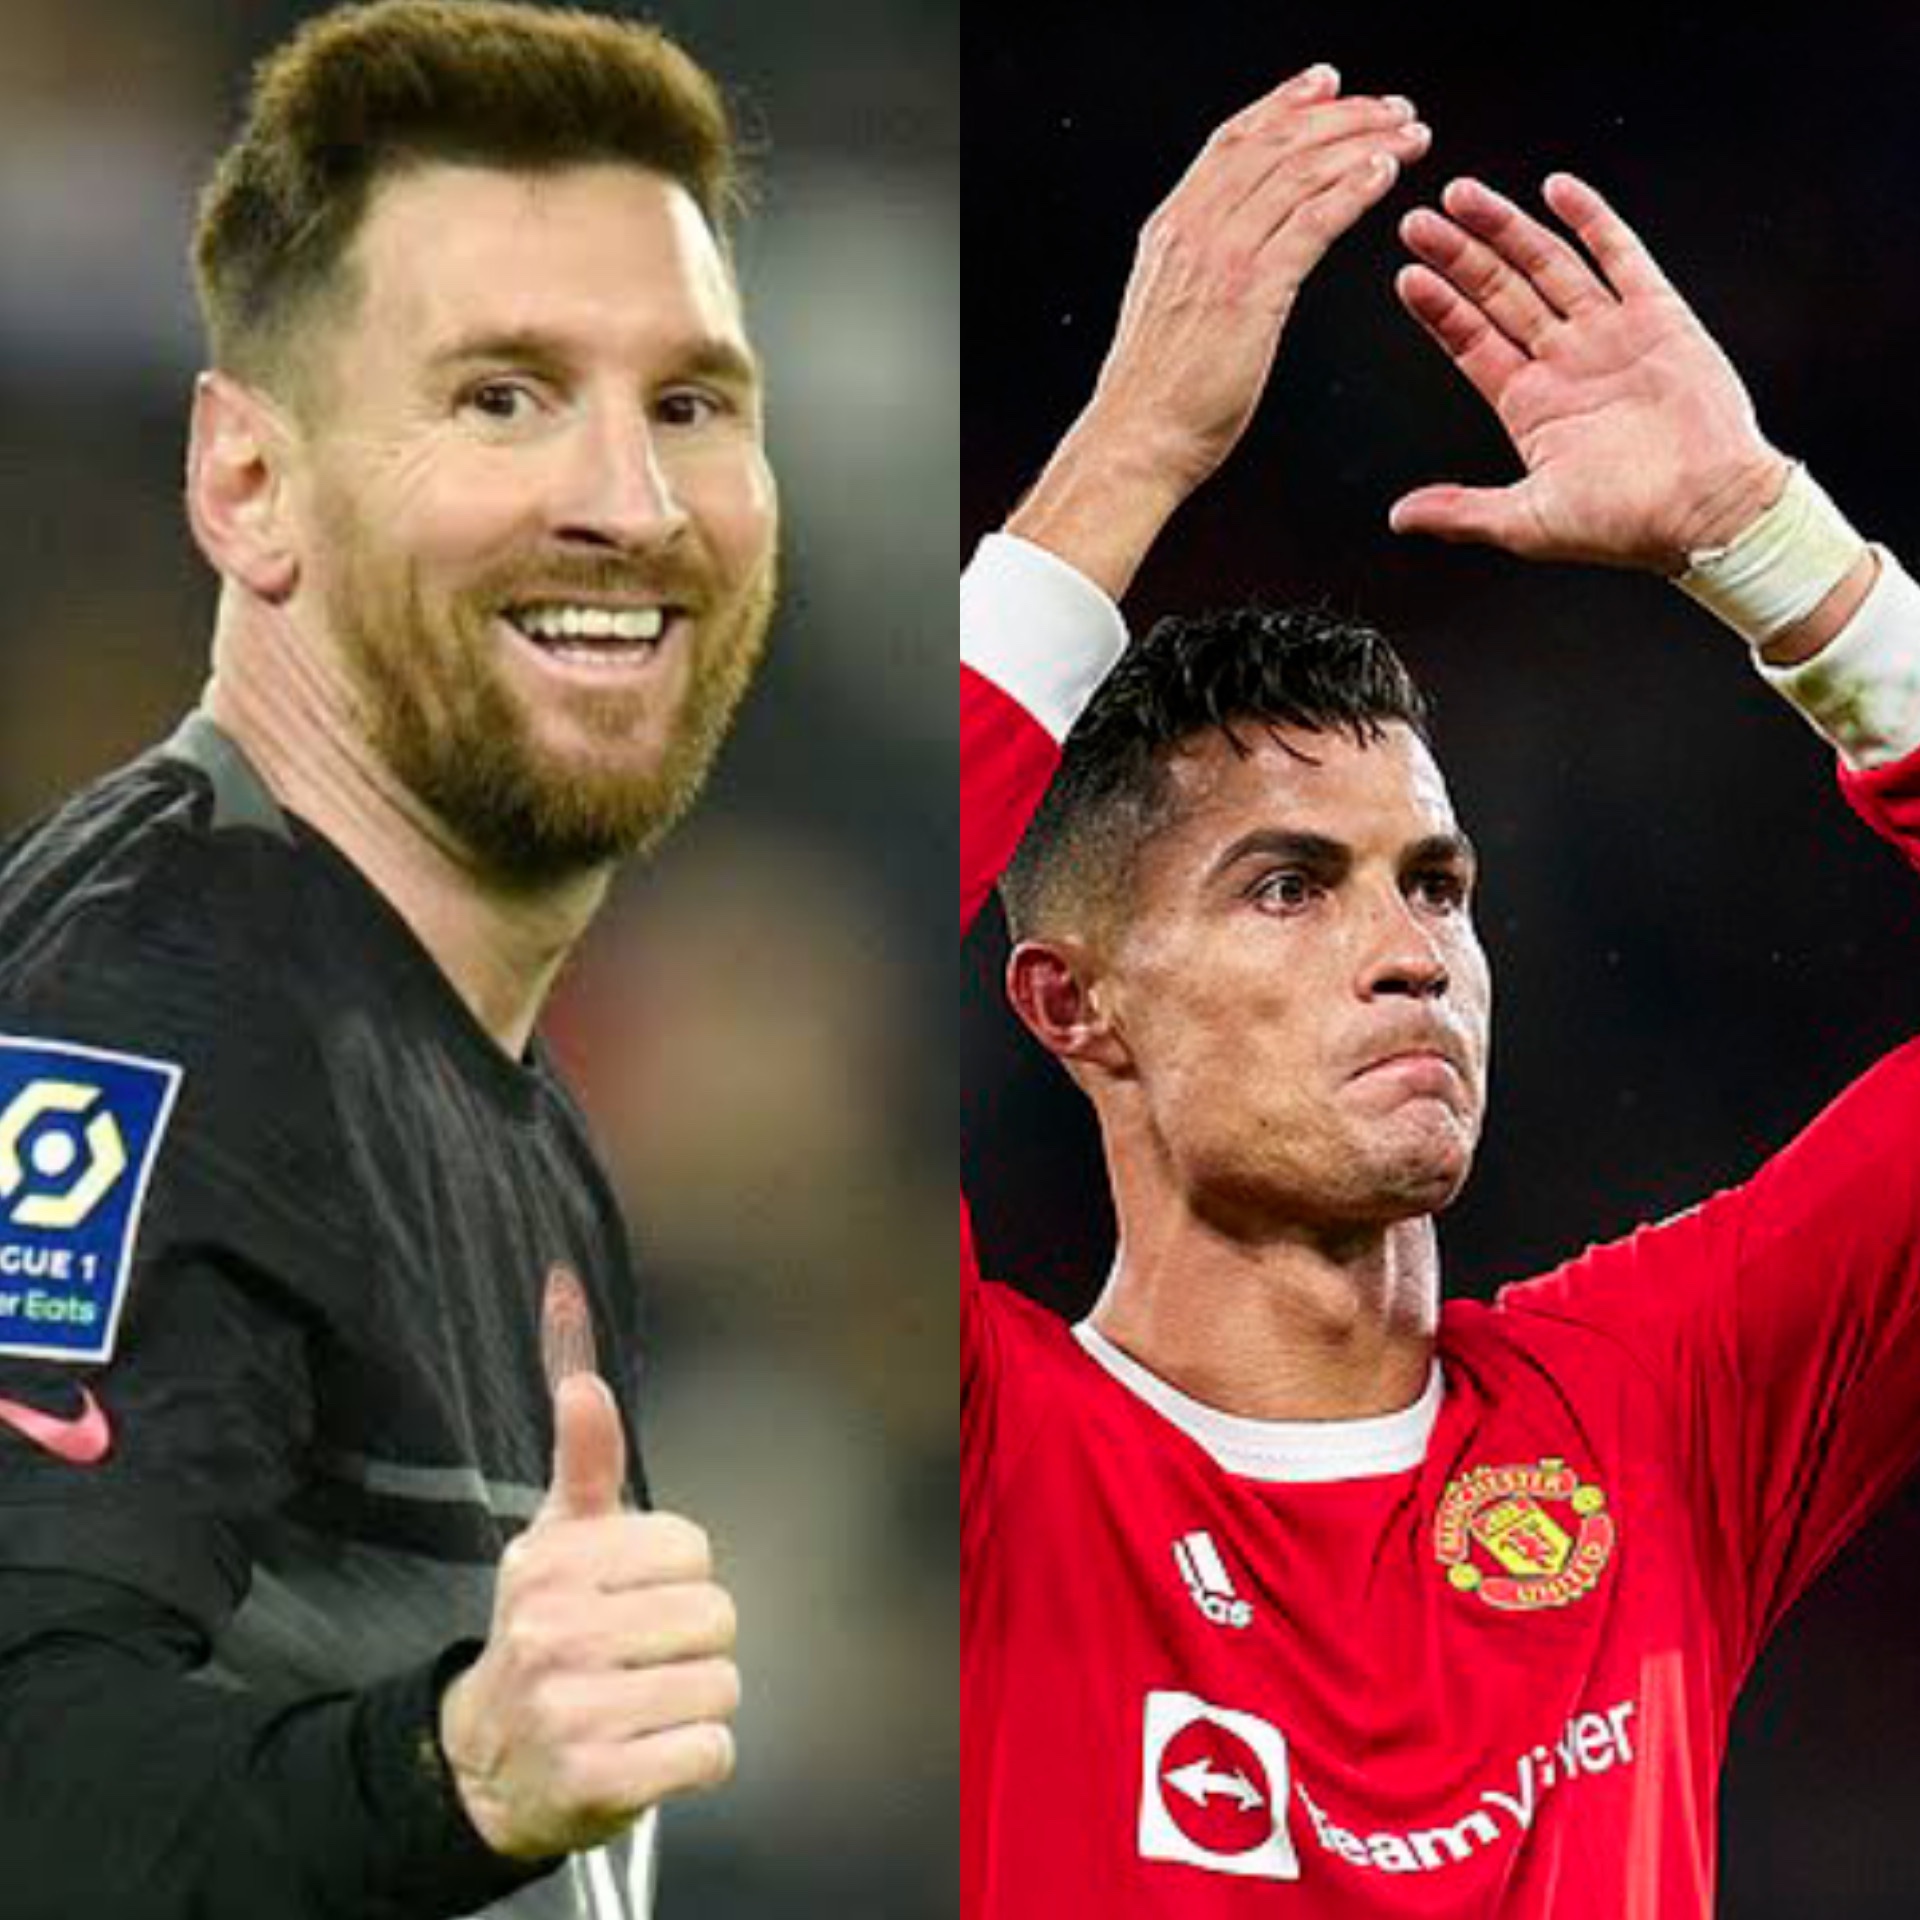 Lionel Messi gives his opinion on Cristiano Ronaldo’s return to Manchester United as he reflects on their rivalry